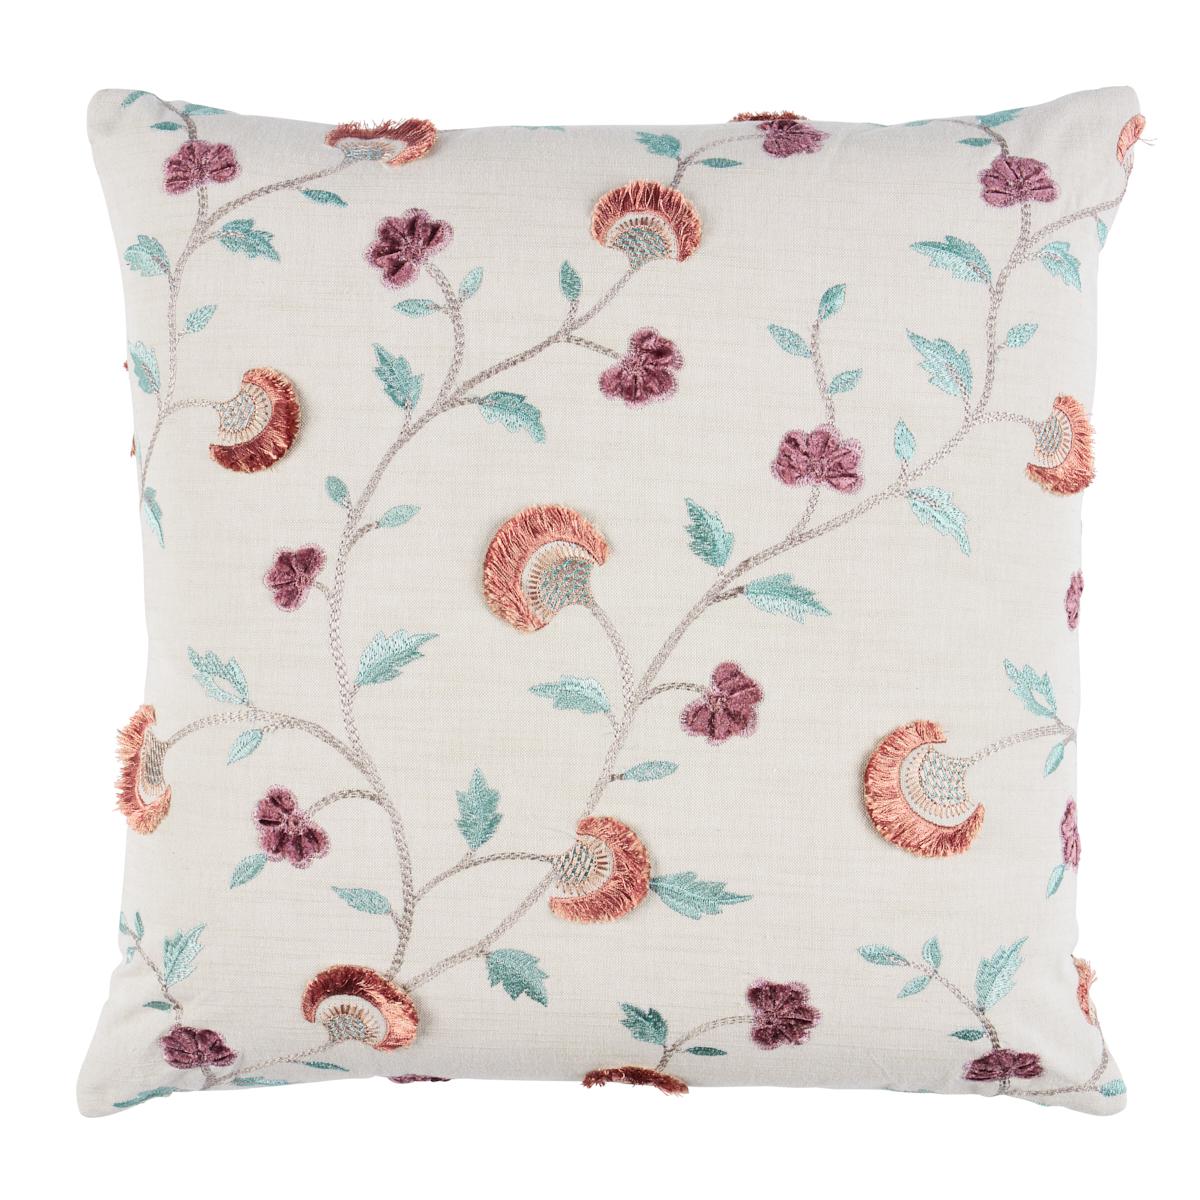 Iyla Embroidery Pillow in Rose & Natural 18 x 18" For Sale